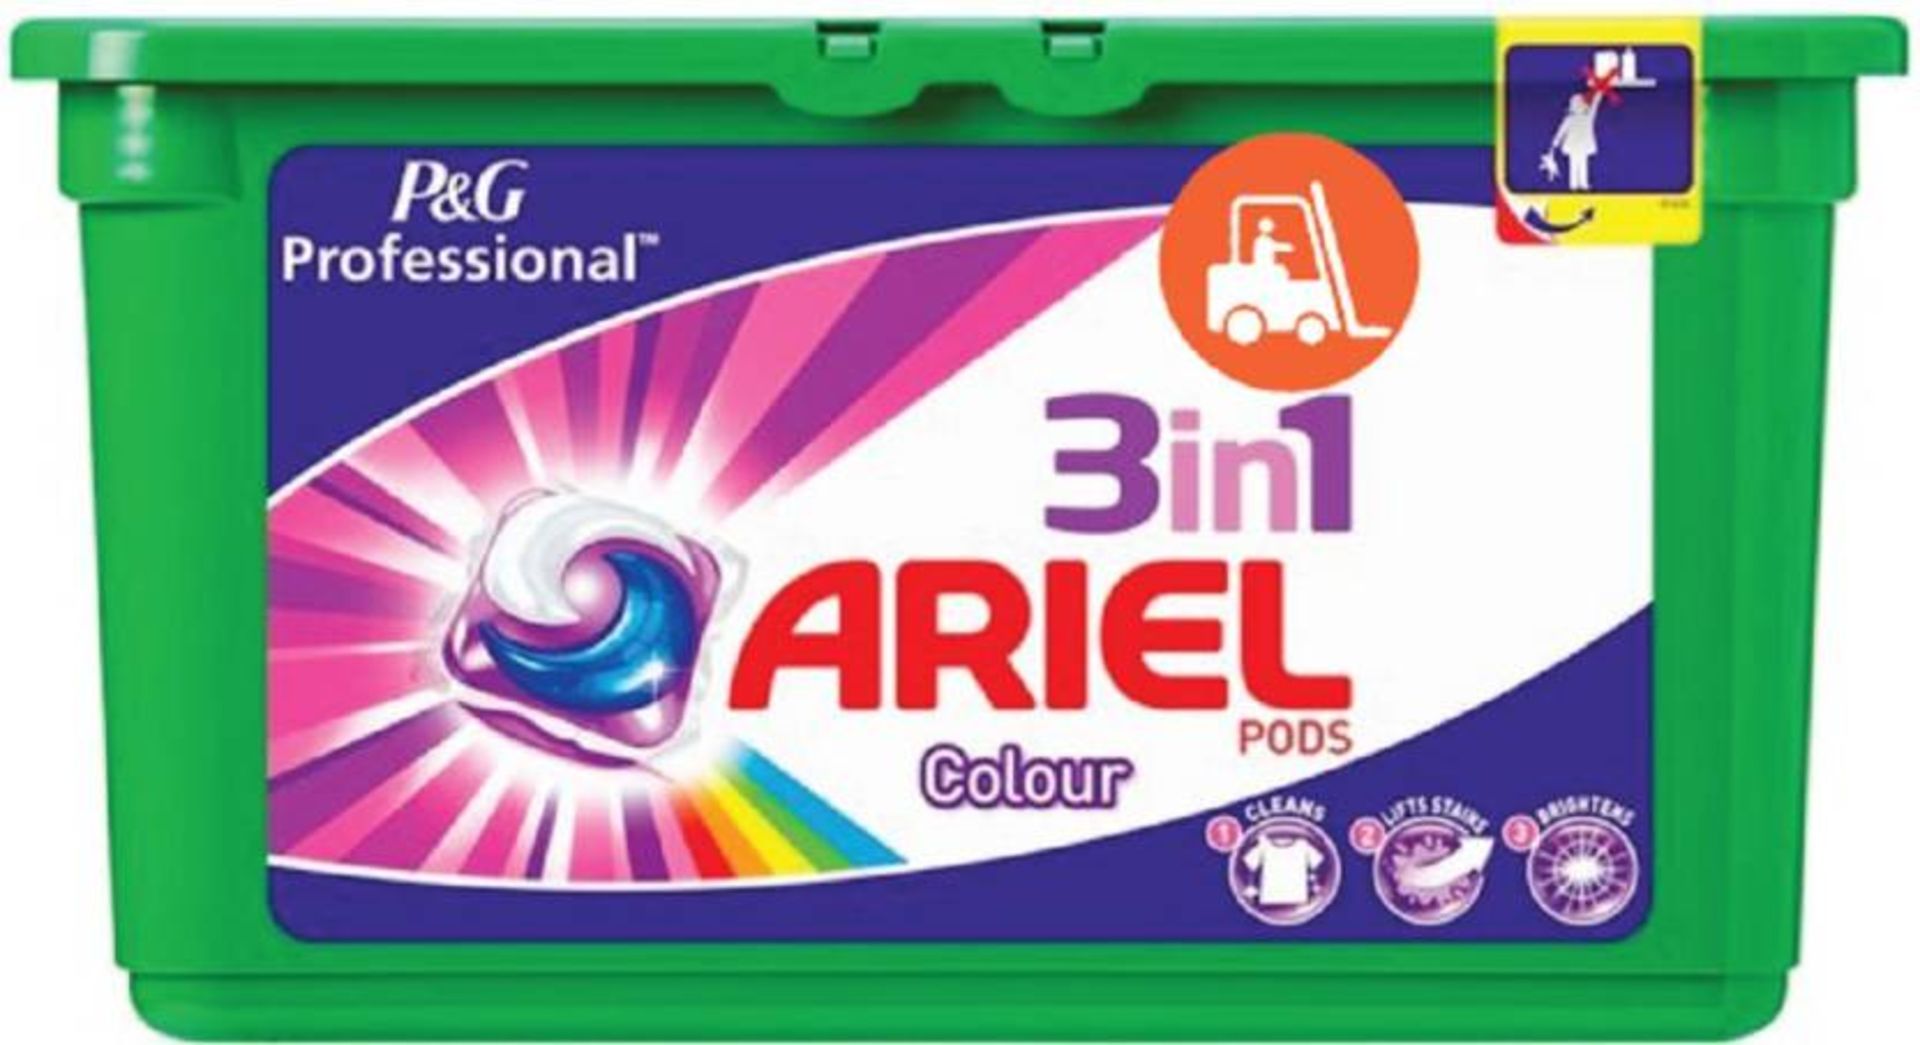 V Brand New Ariel 3 in 1 Pods 26 Pack Colour & Style